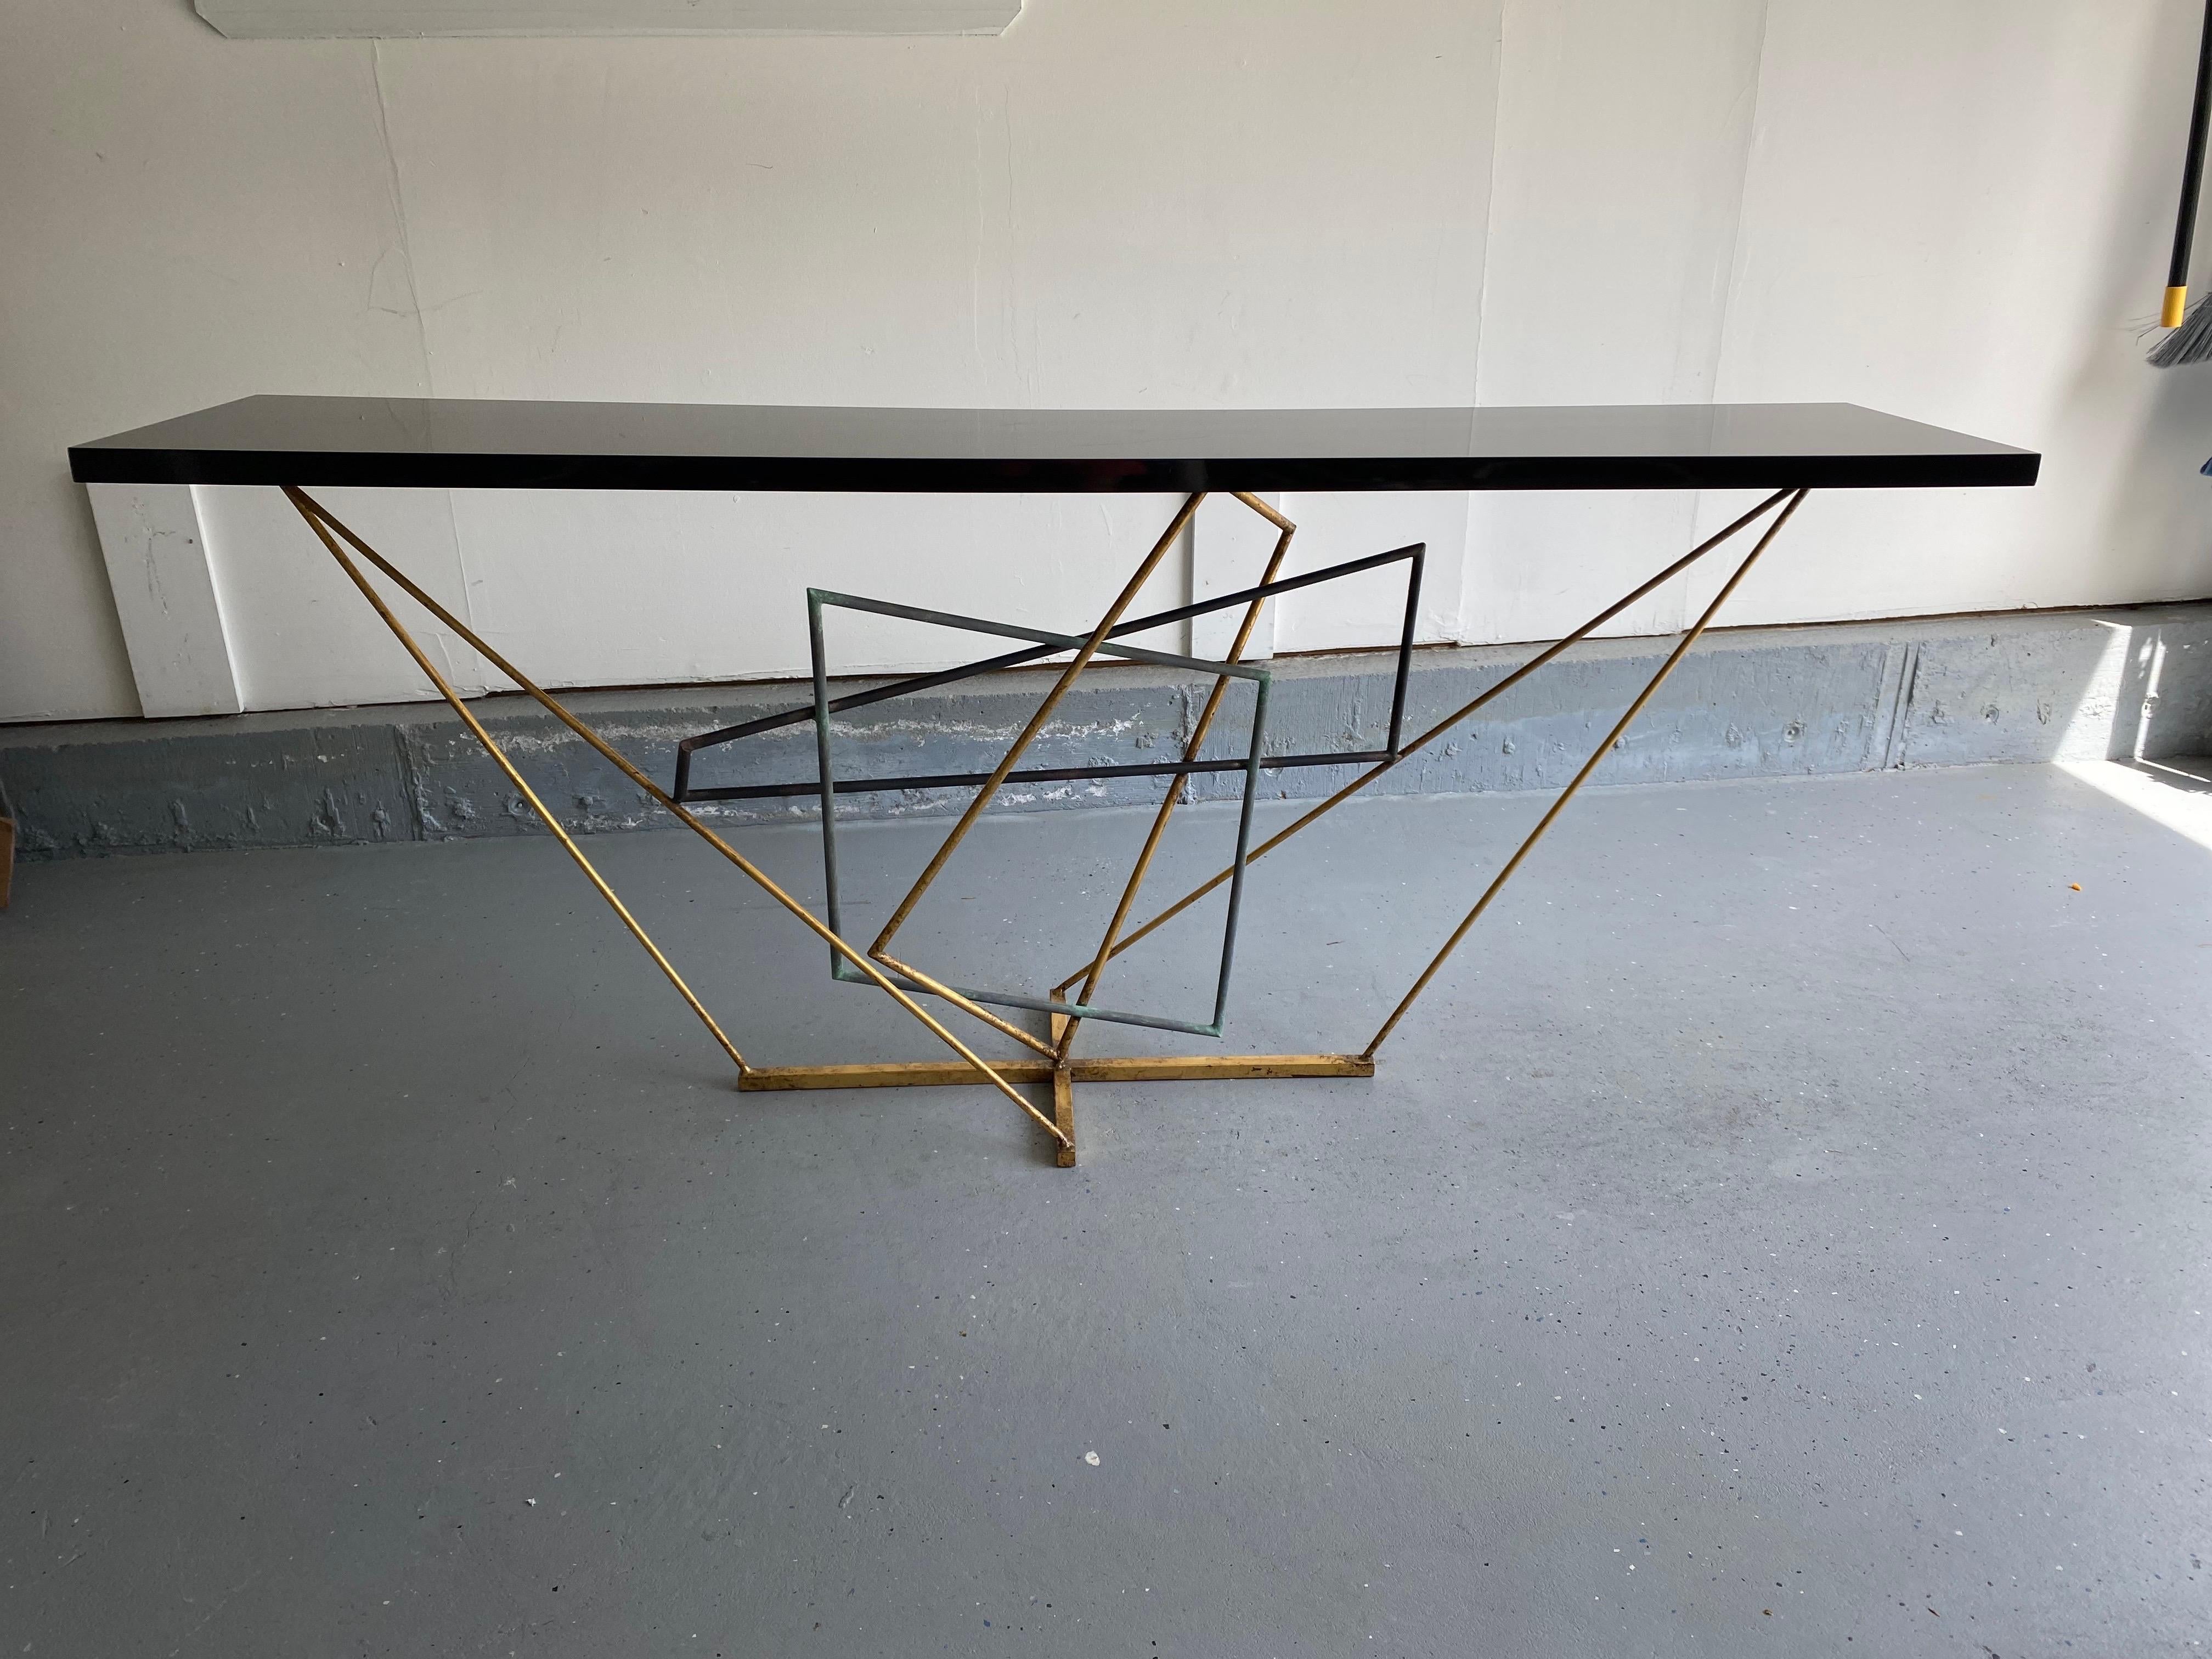  Rhomboid Console Table was designed by Gareth Devonald Smith for Porta Romana
Forged Steel in three finishes: verdigris, scratched gold, and fired copper finish with a black lacquered wood top. Table requires wall fixing. Anchor brackets on one